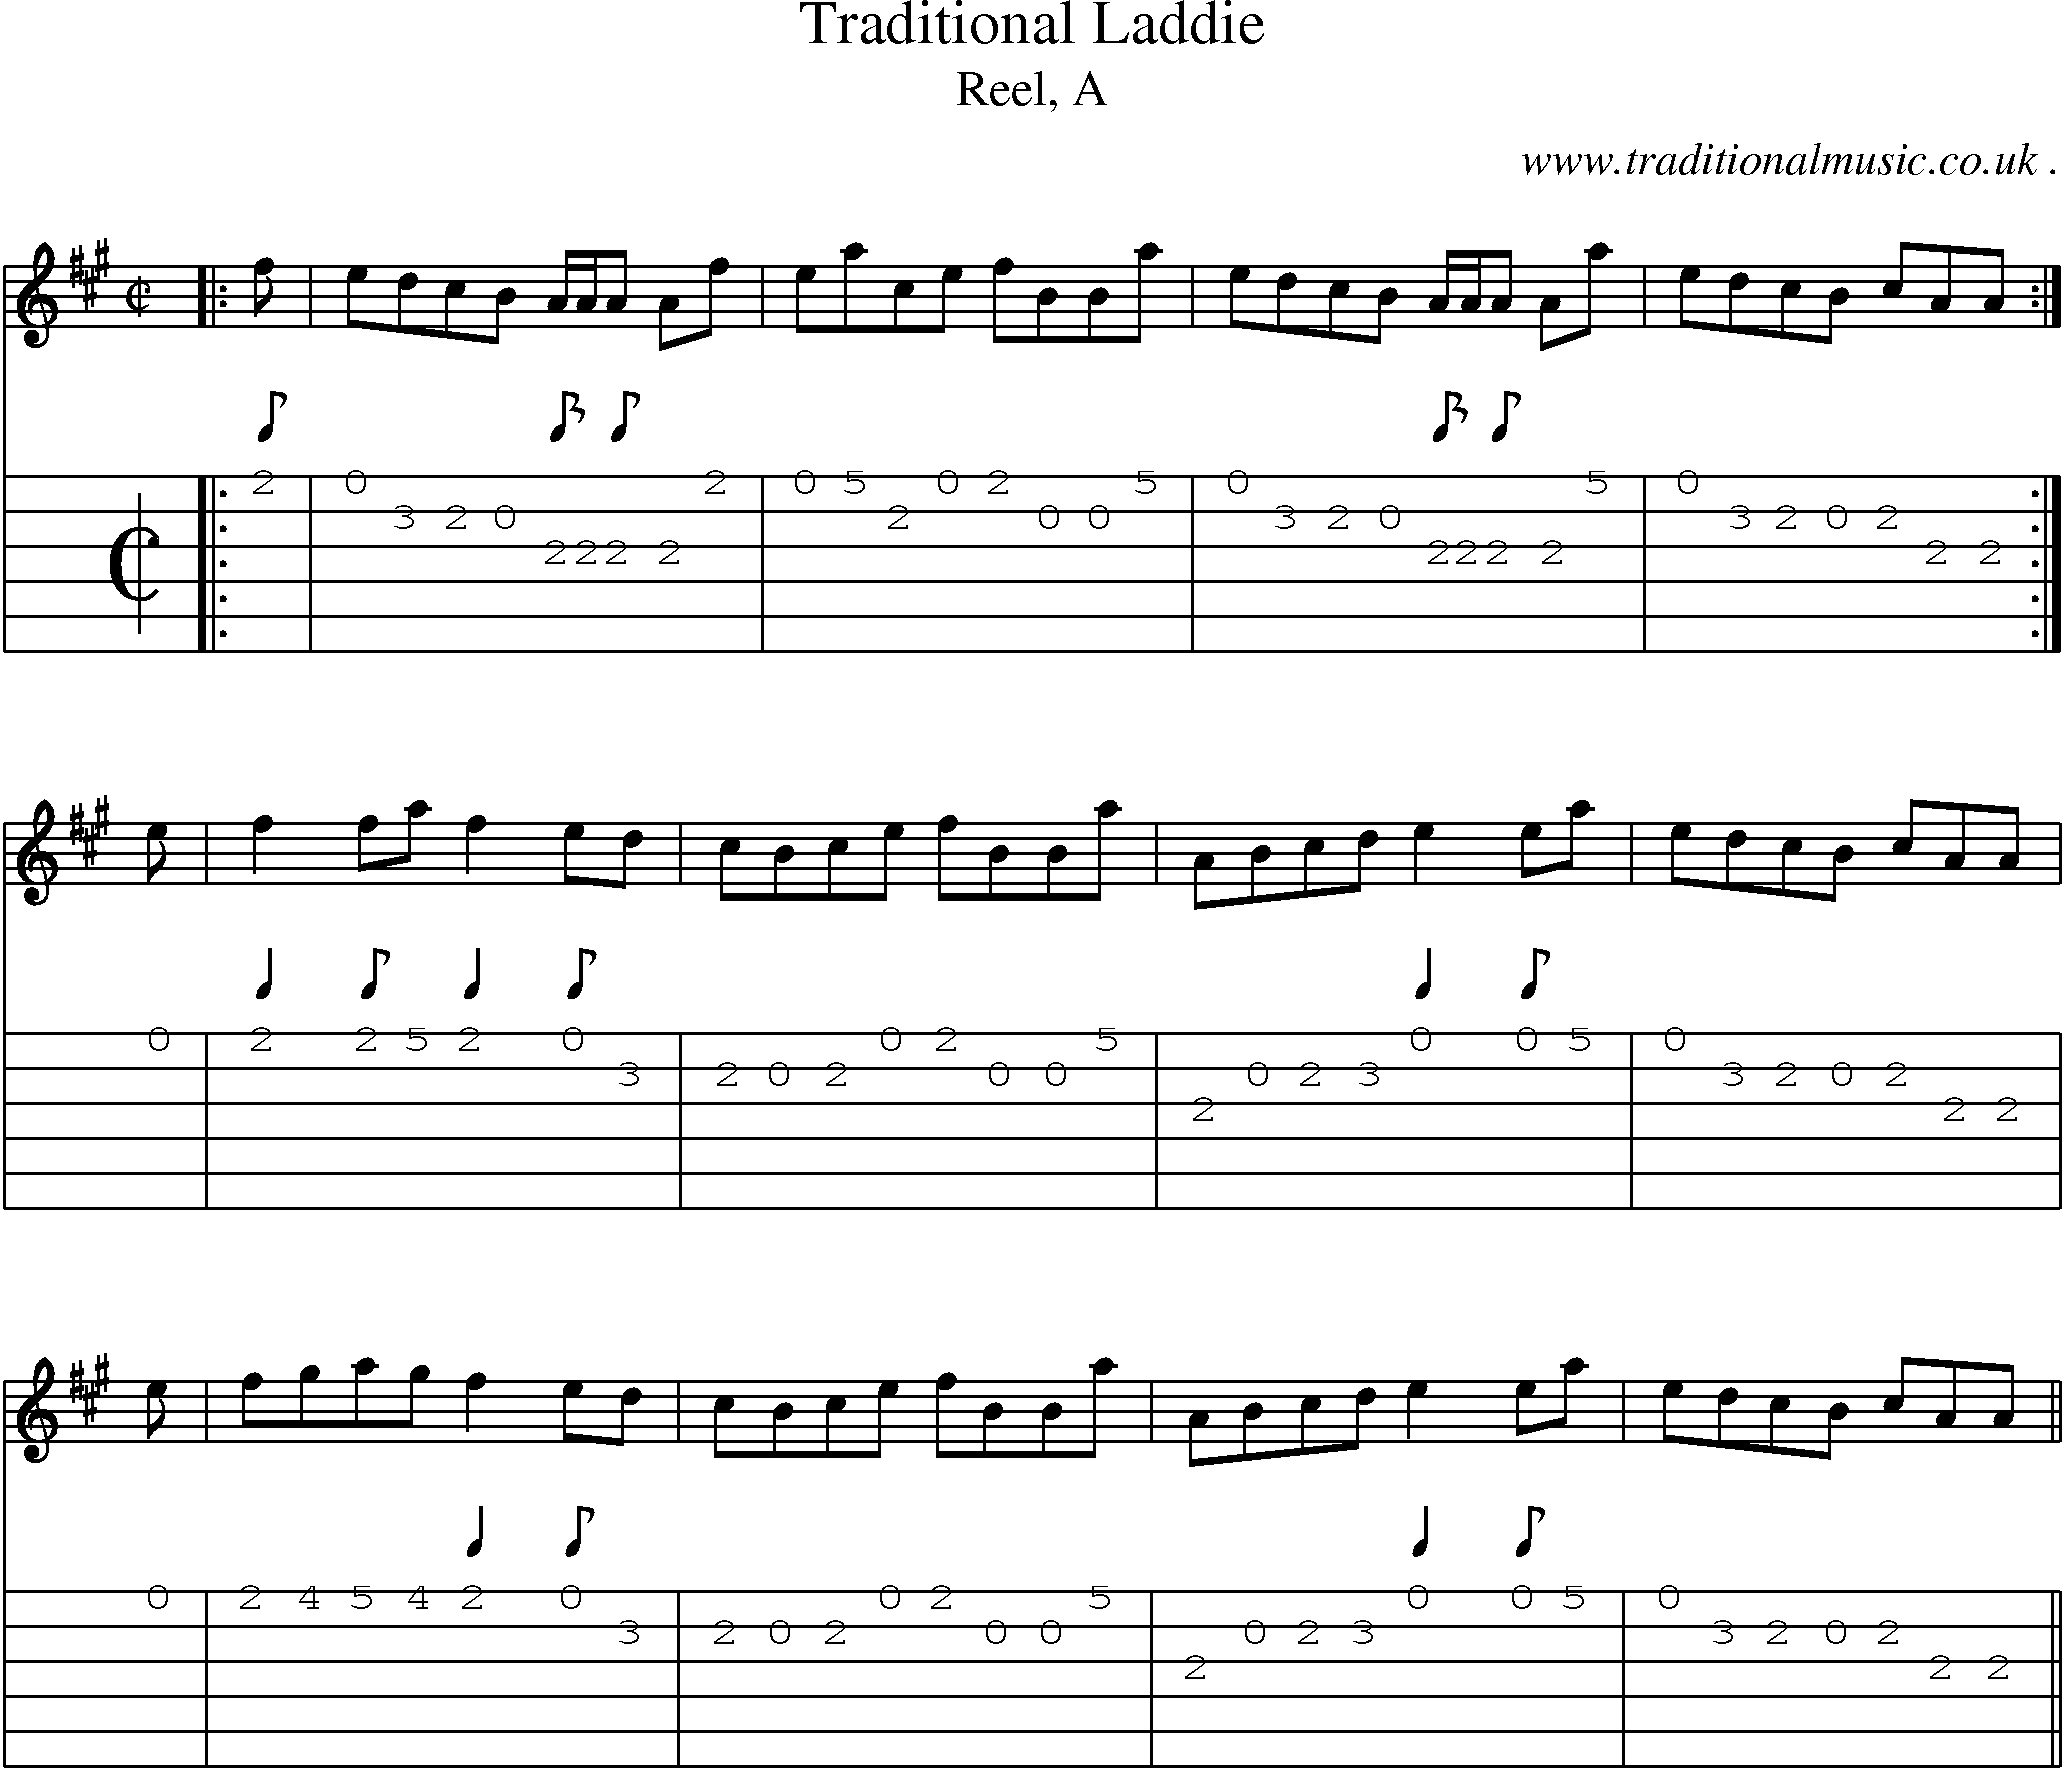 Sheet-music  score, Chords and Guitar Tabs for Traditional Laddie